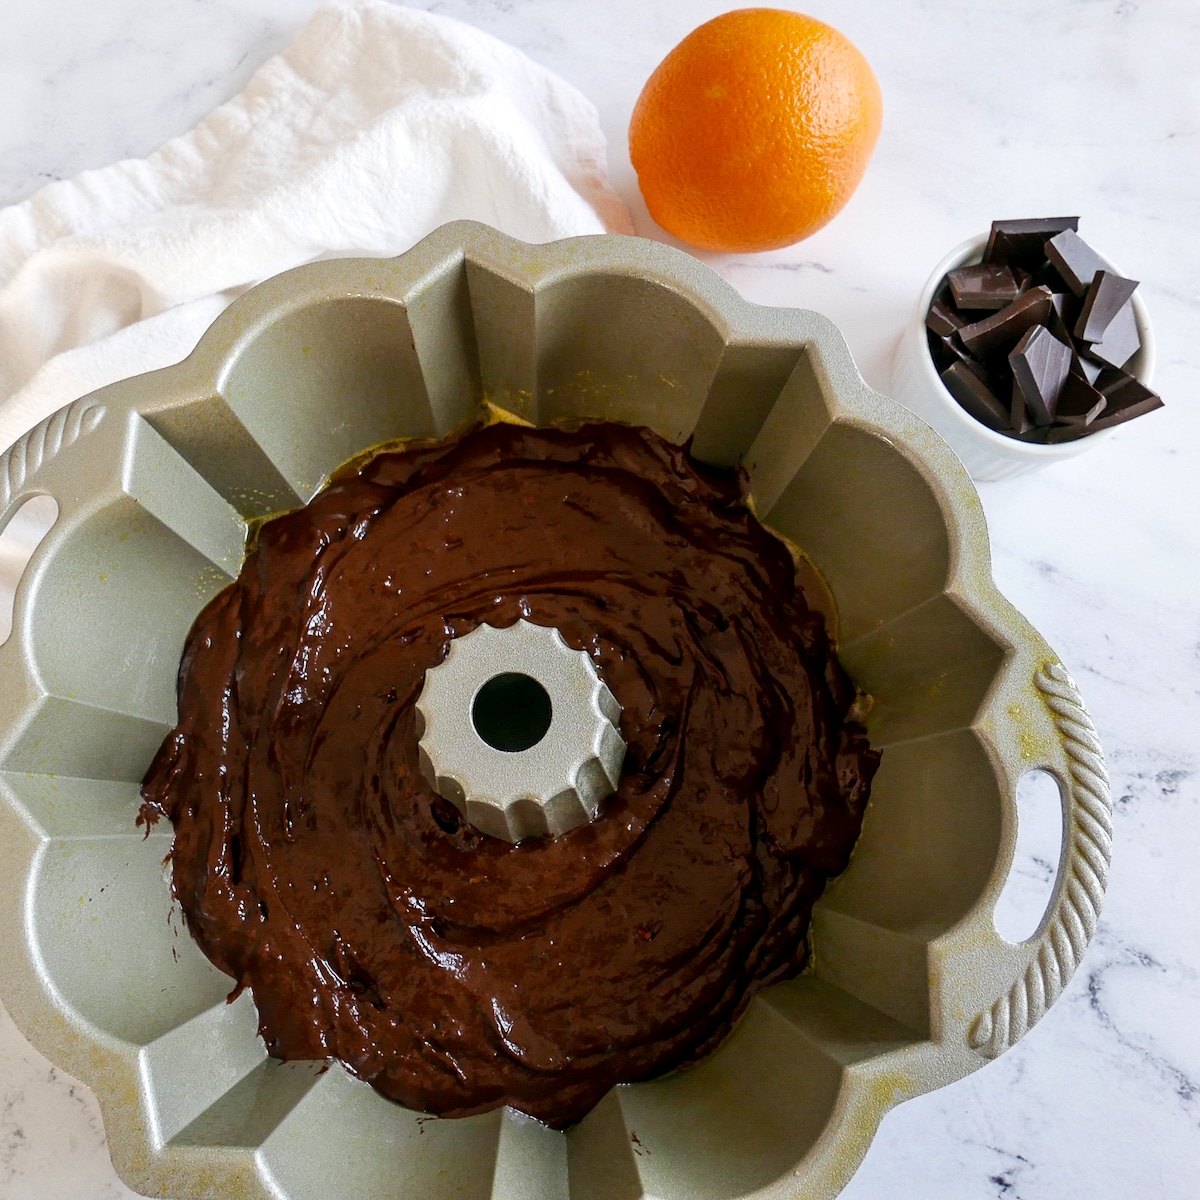 cake batter poured into bundt pan with chopped chocolate and an orange in the background.